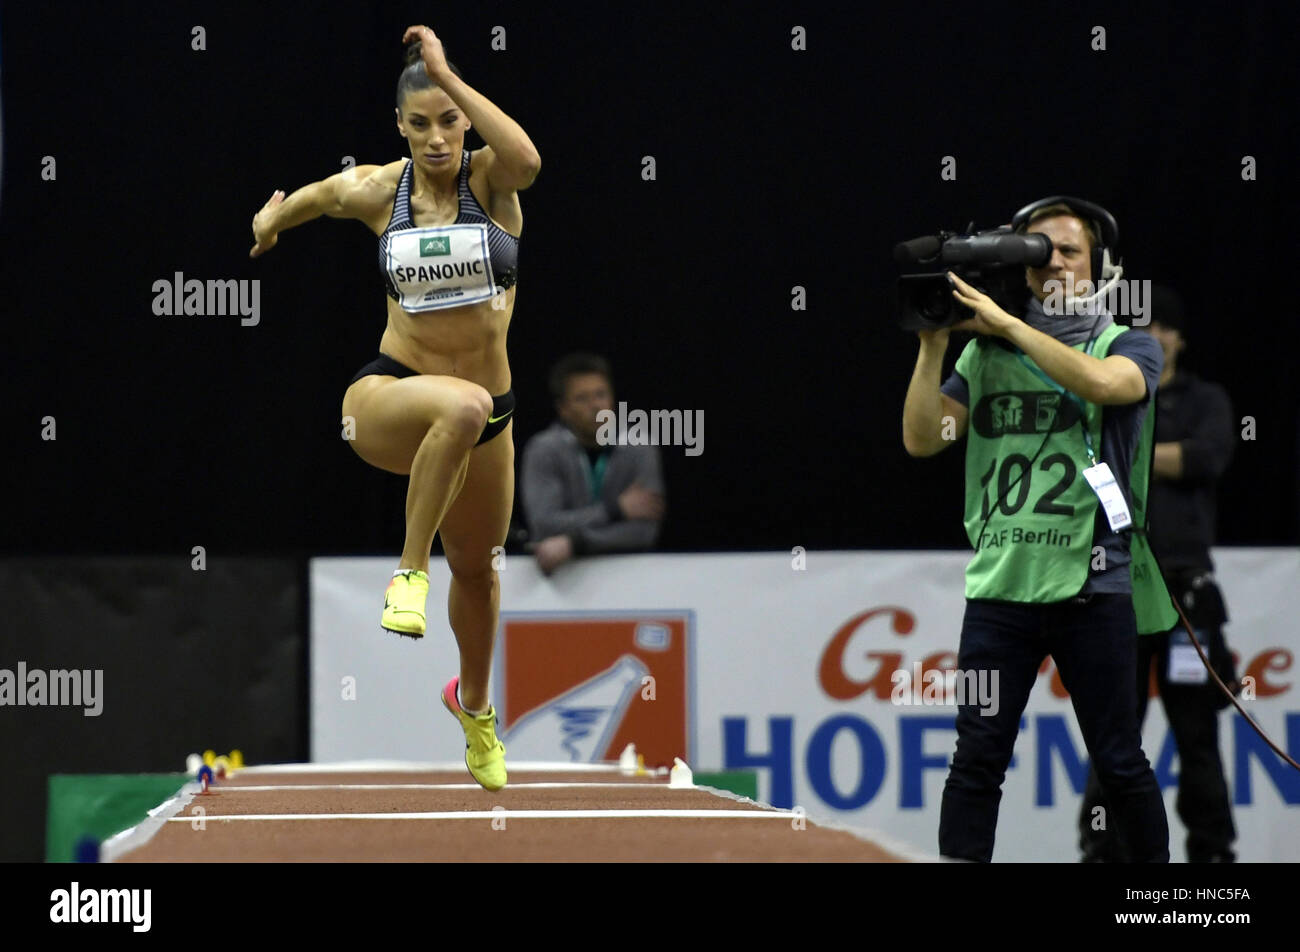 Berlin, Germany. 10th February 2017. ISTAF Indoor 2017, Mercedes-Benz Arena in Berlin, Germany. 10th February, 2017.  Women Long Jump winner Ivana Spanovic (Serbia) jumping a distance of 6.87 meters. Credit: Paul Velasco/Alamy Live News Stock Photo